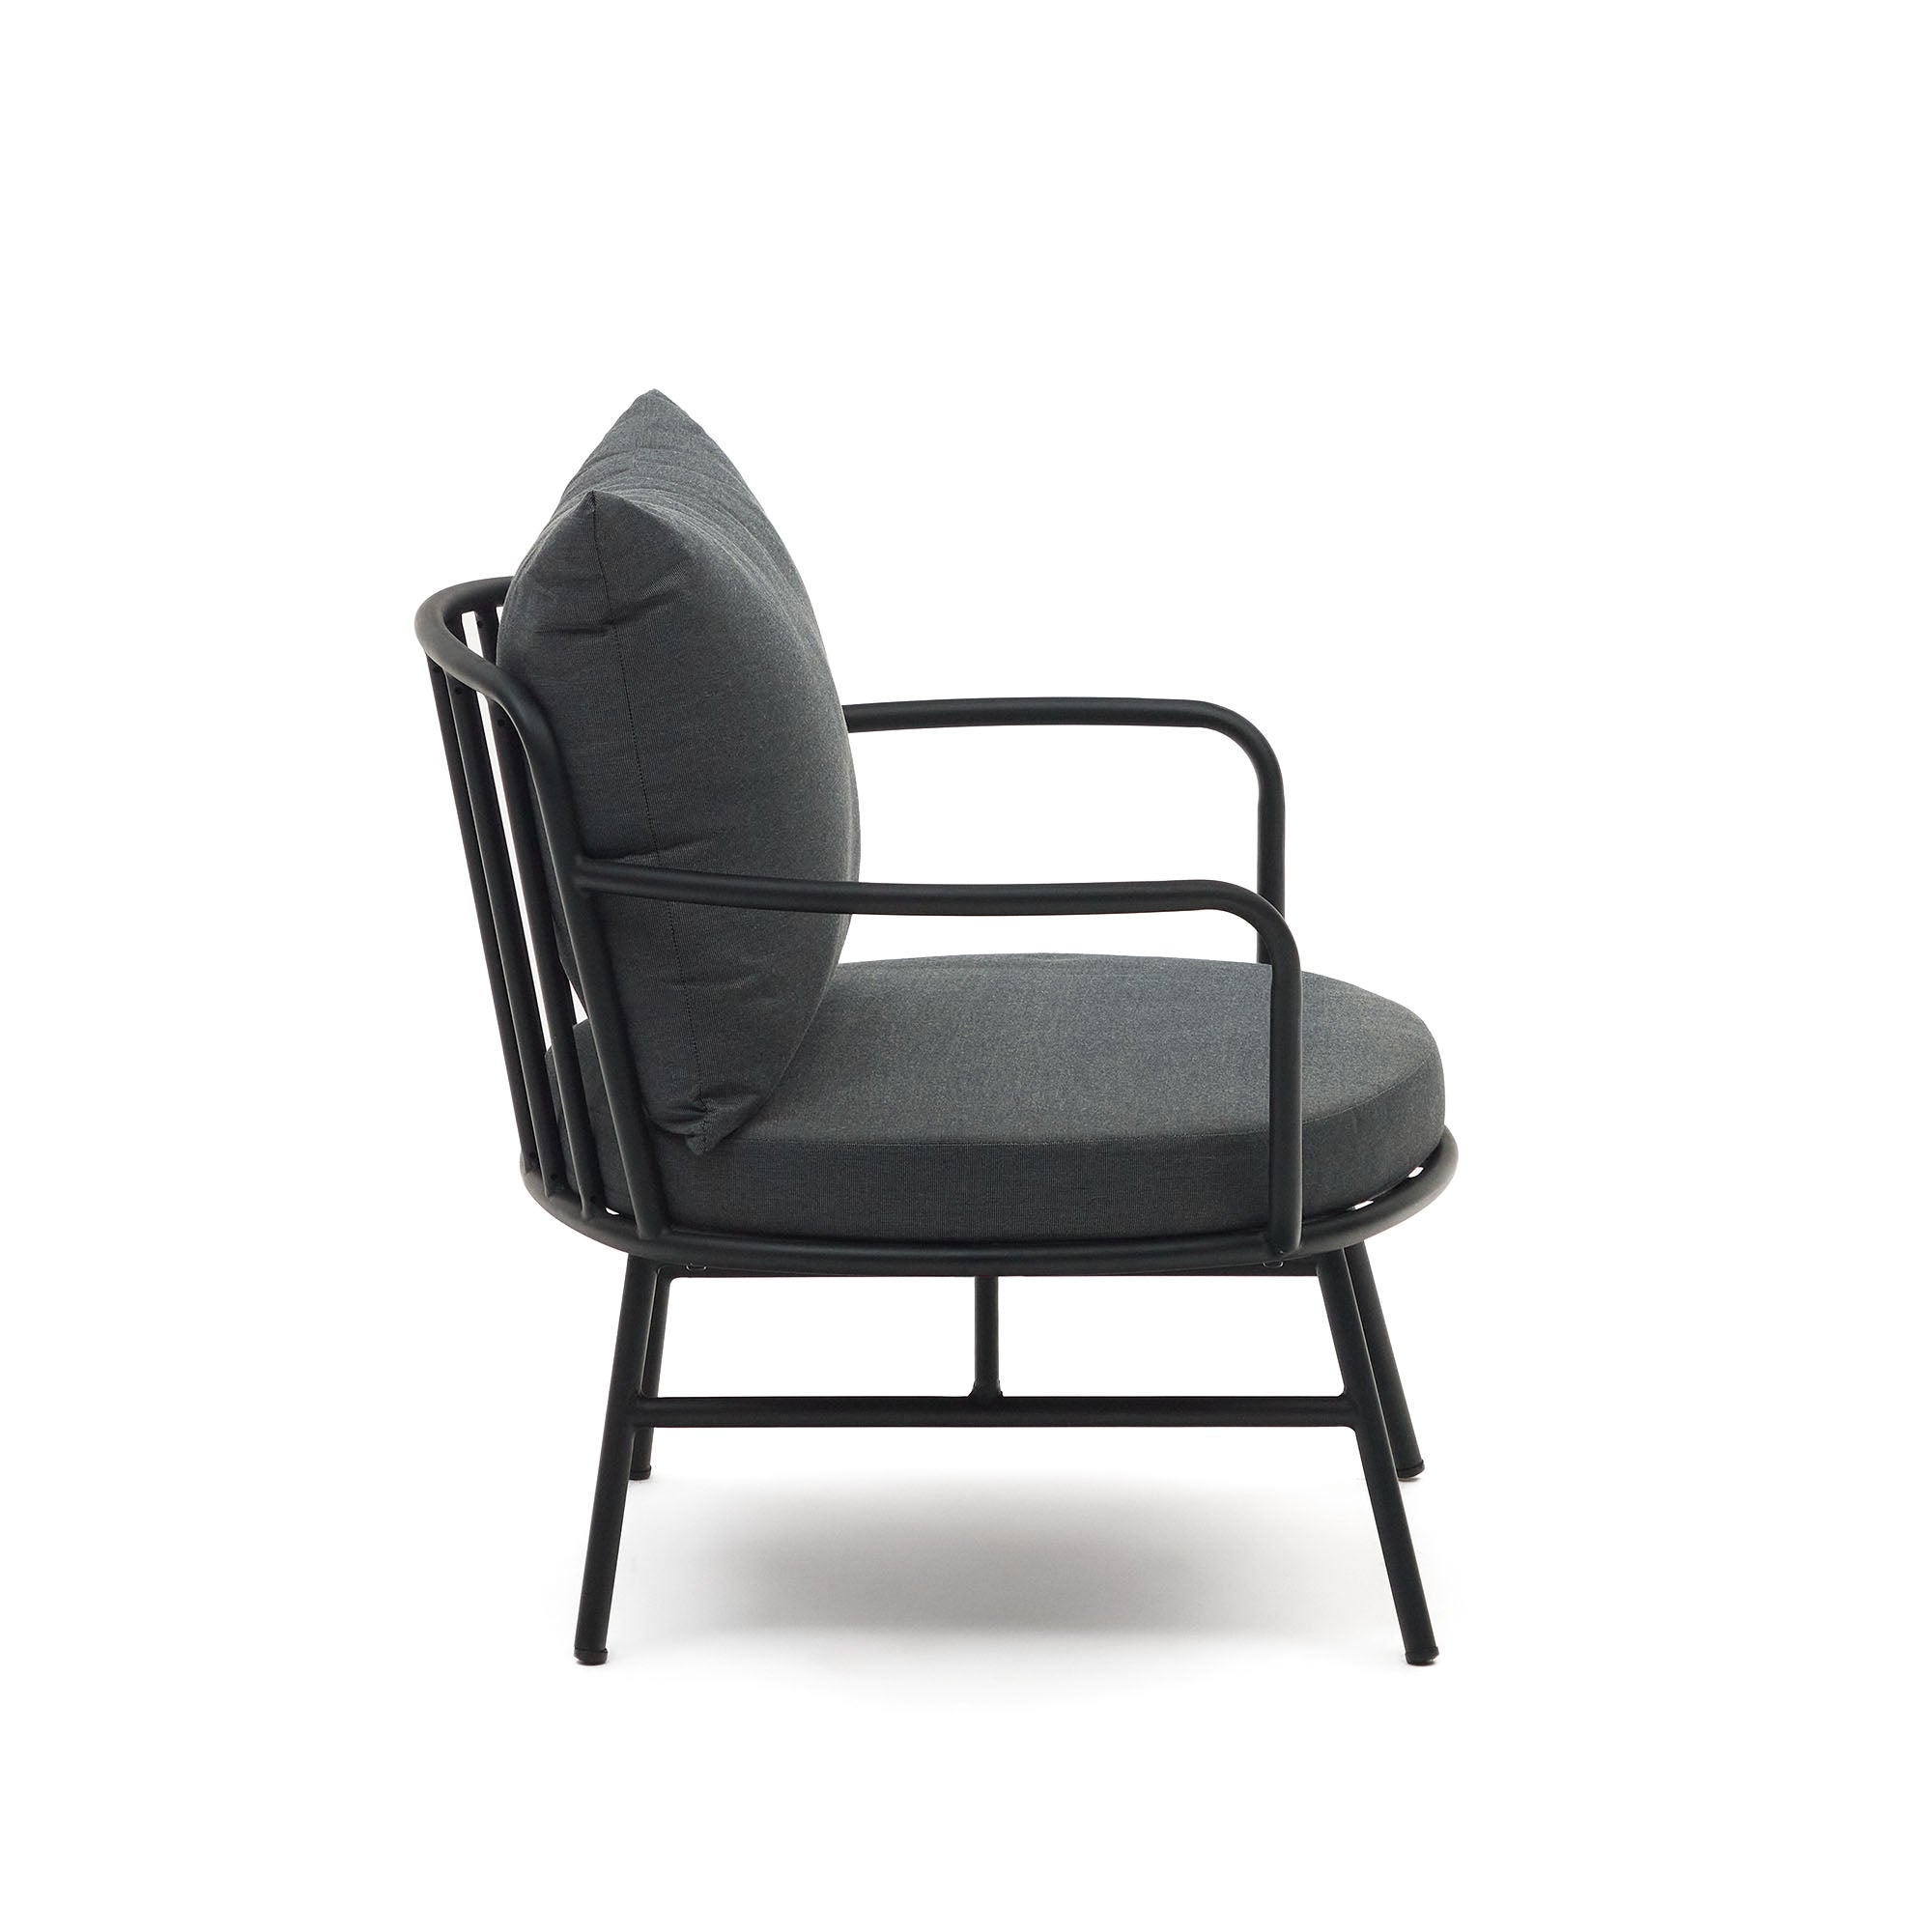 Bramant steel armchair with black finish